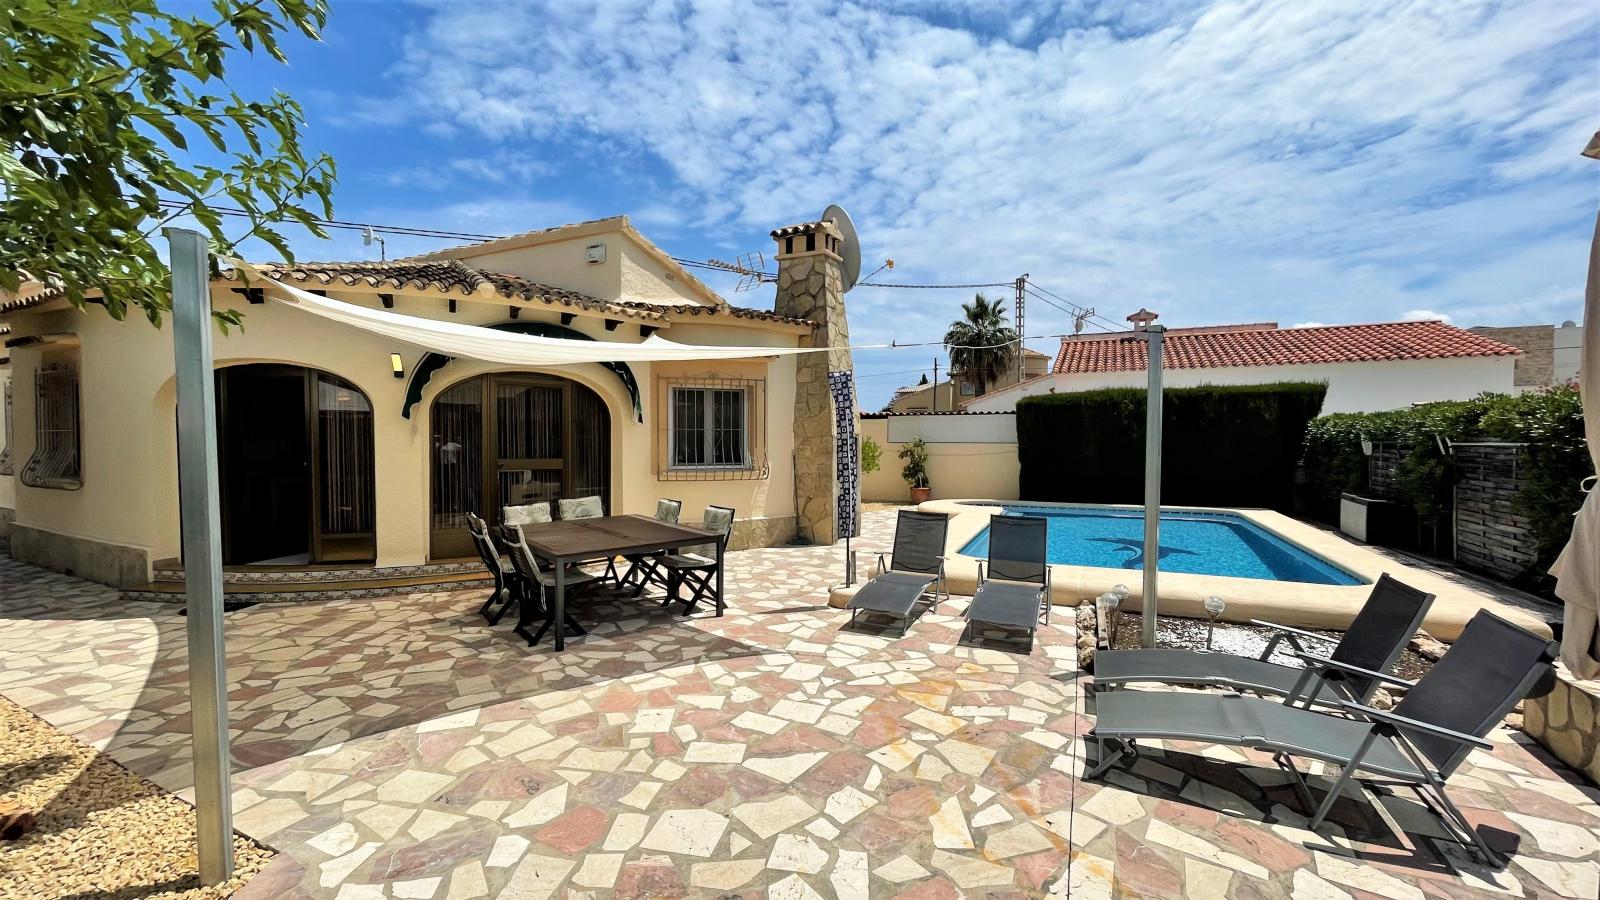 Lovely villa in Els Poblets, with pool, central heating, air conditioning , conservatory and much more!